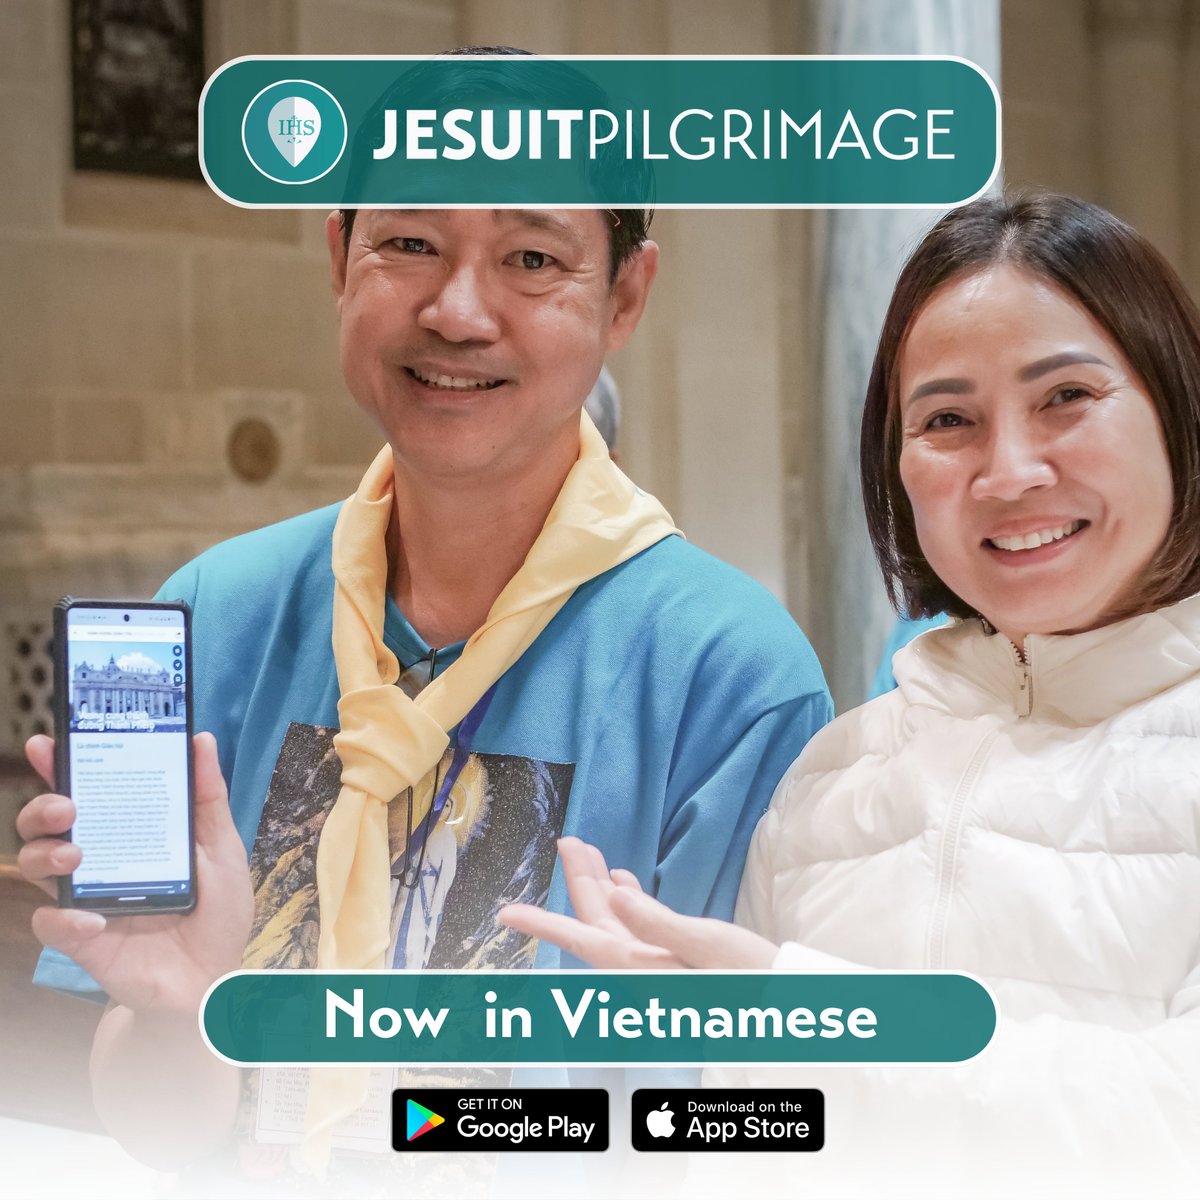 We're excited to unveil the Vietnamese edition of the Jesuit Pilgrimage app! Now featuring offline download capability, ensuring seamless access even without a stable network connection during your spiritual journey. Search 'Jesuit Pilgrimage' on your Play Store or App Store.